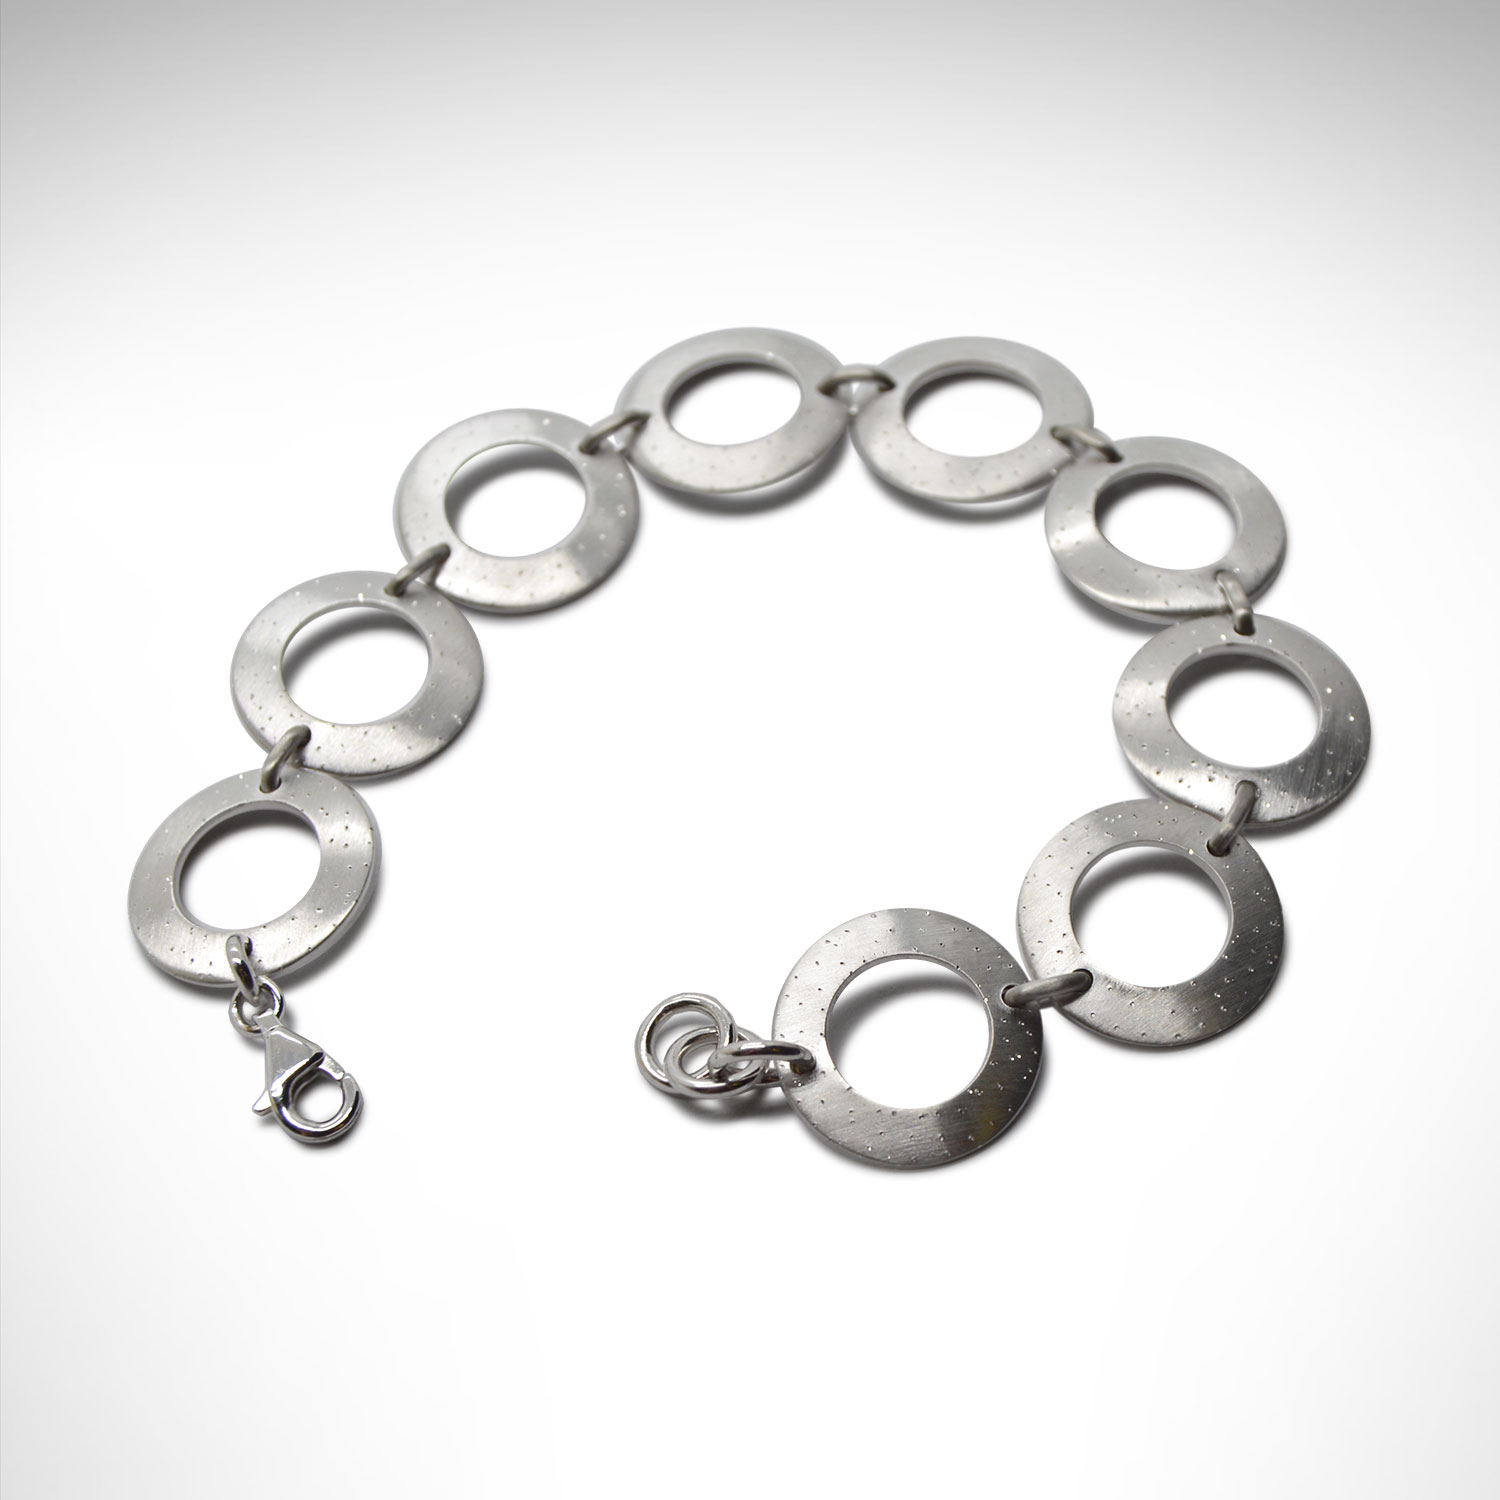 Sterling silver bracelet with circle links in a satin sparkle finish